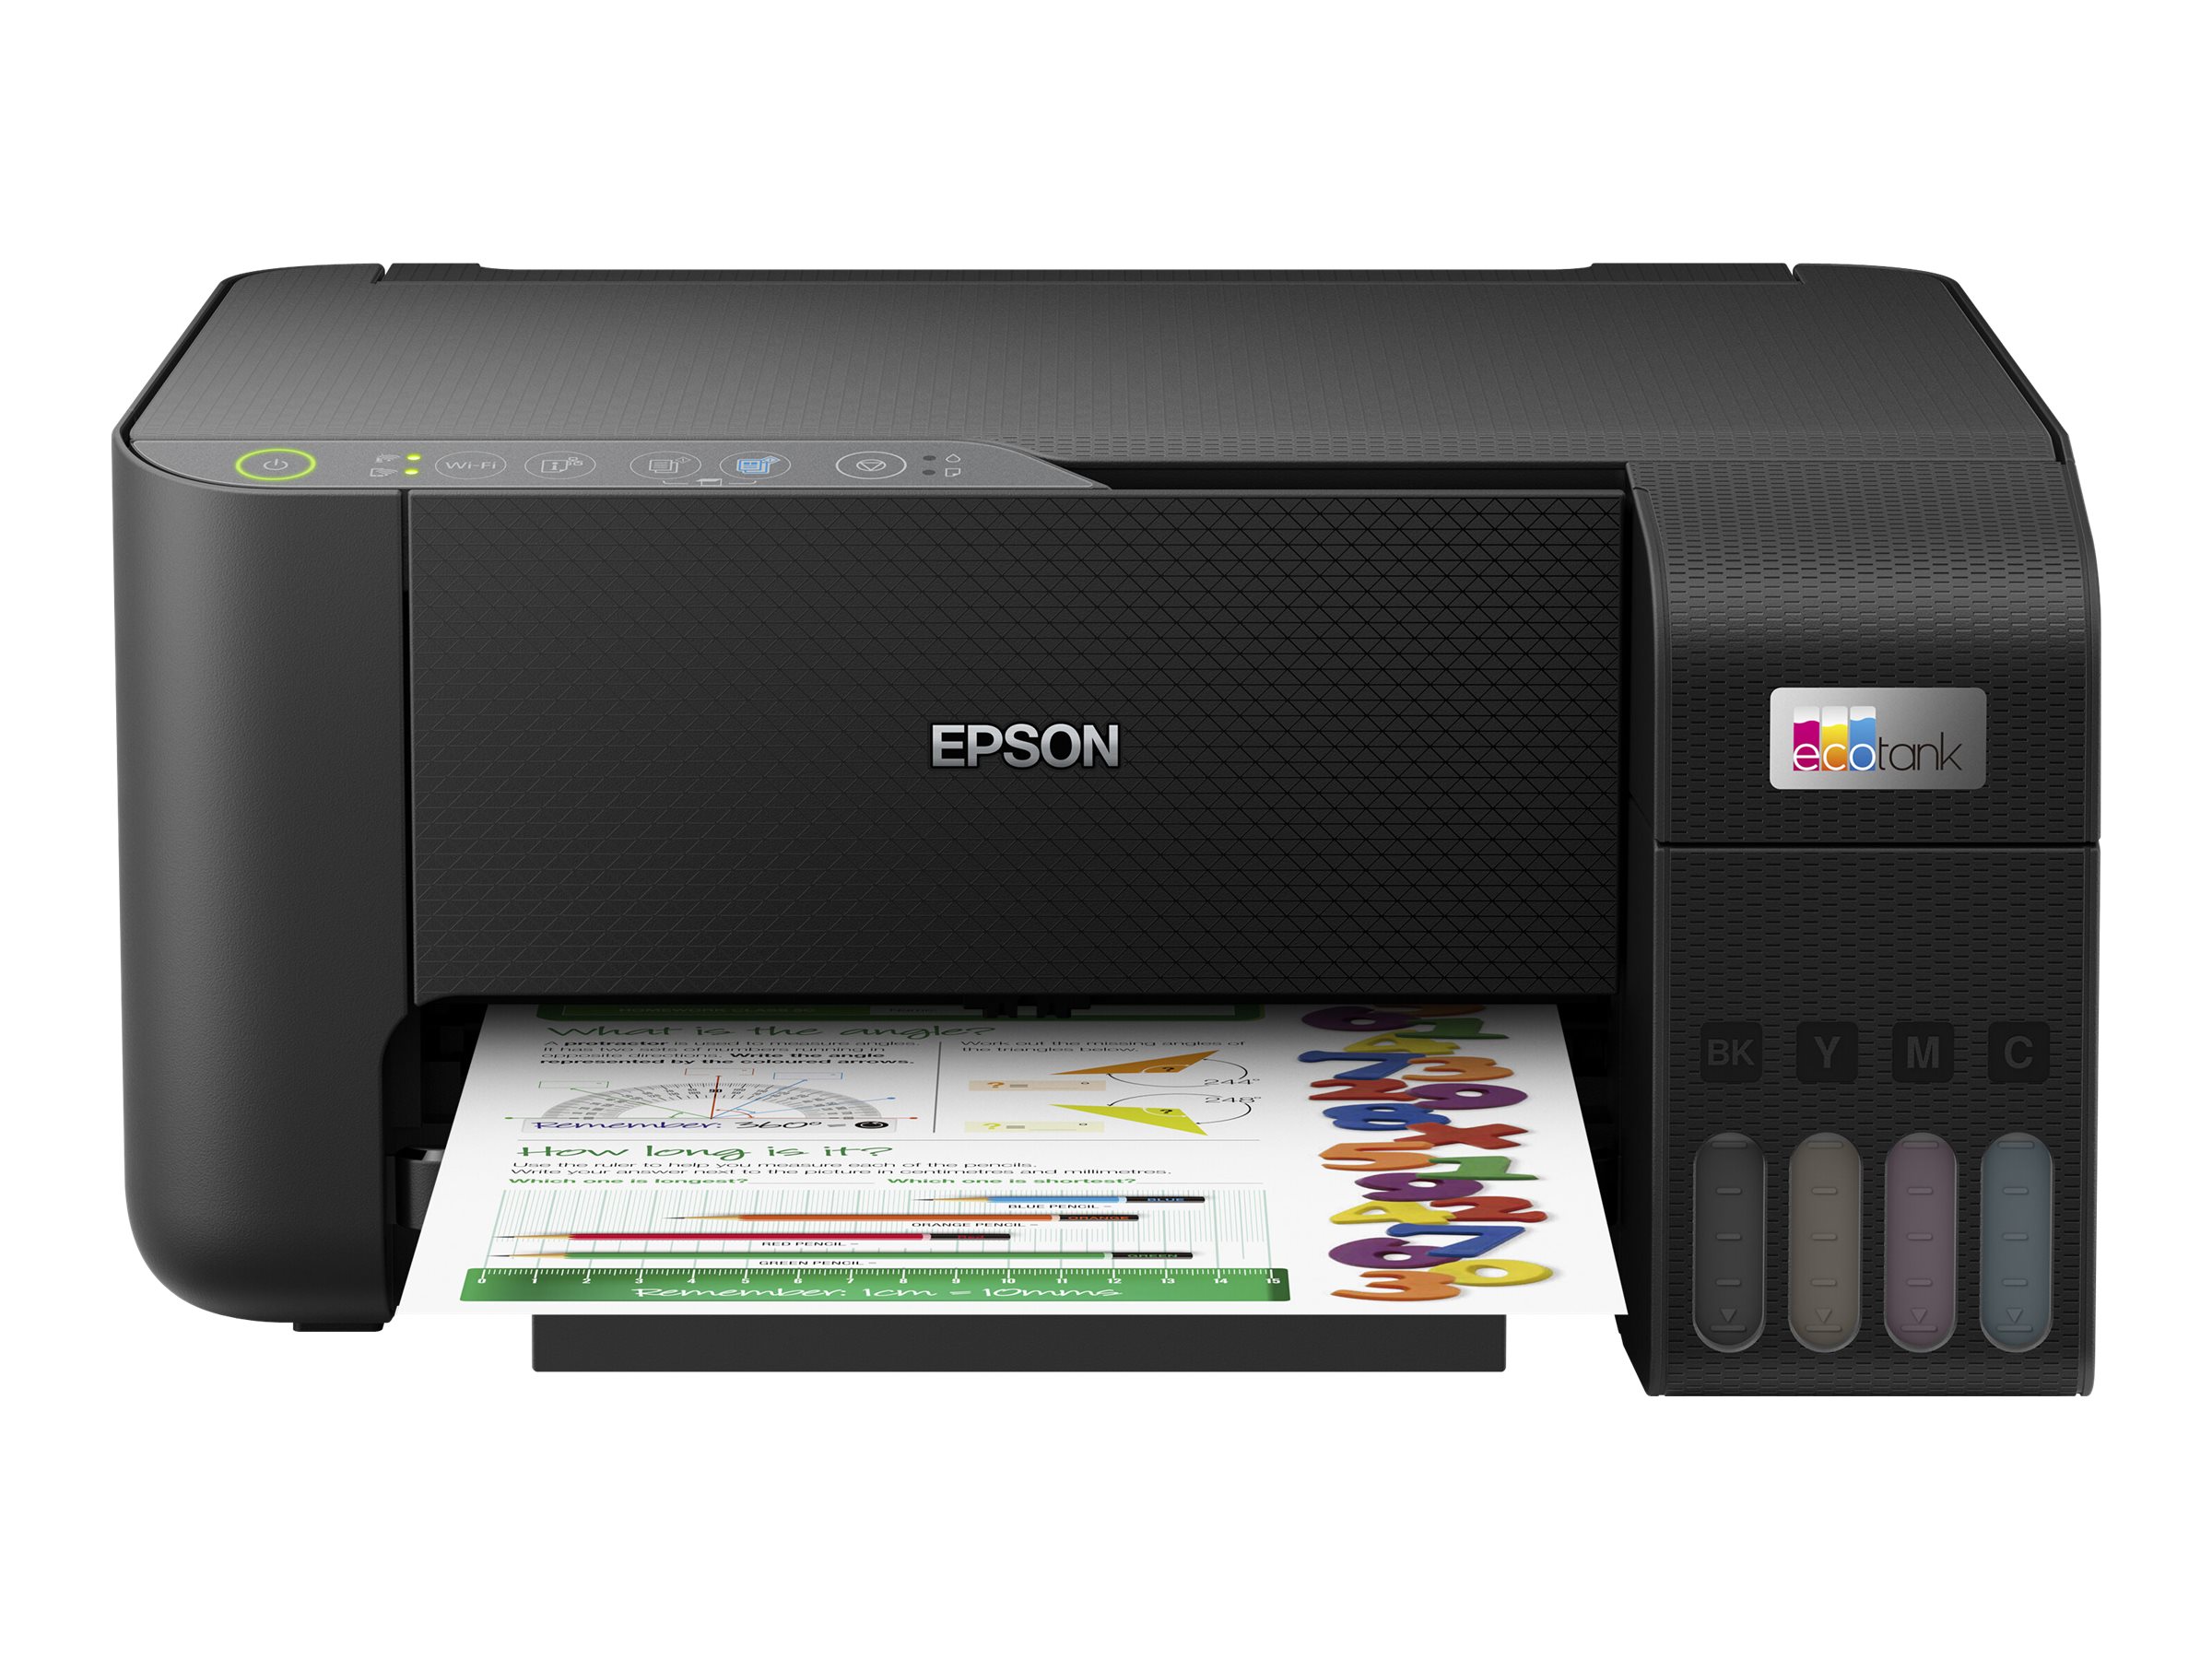 EPSON ET-2810 All-in-One Ink Tank Printer User Guide